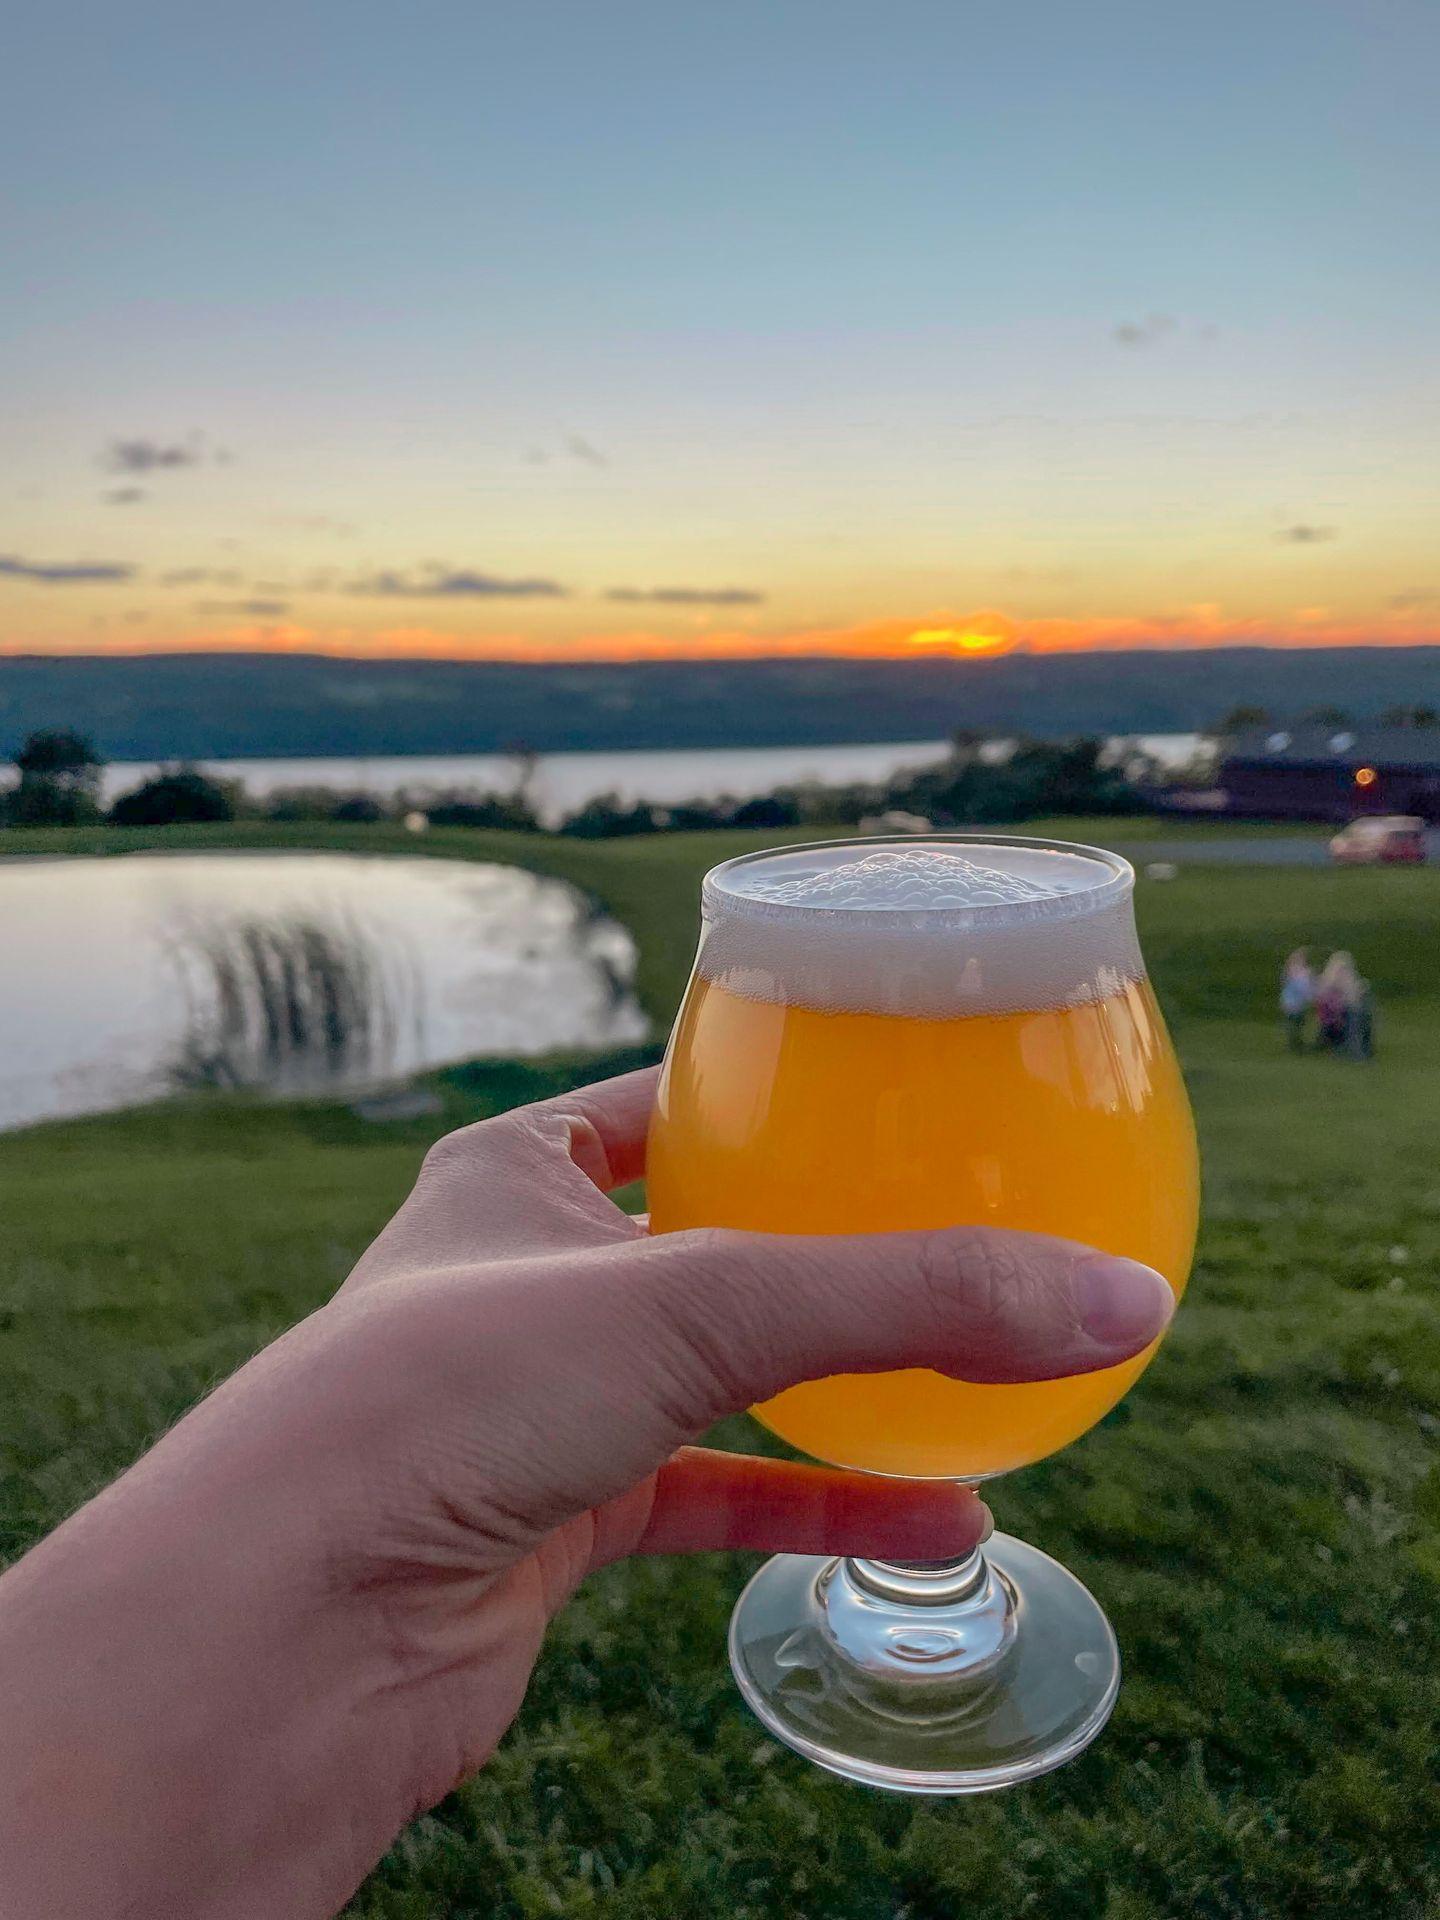 Holding up a glass of beer with a pond, a lake and the setting sun in the distance.